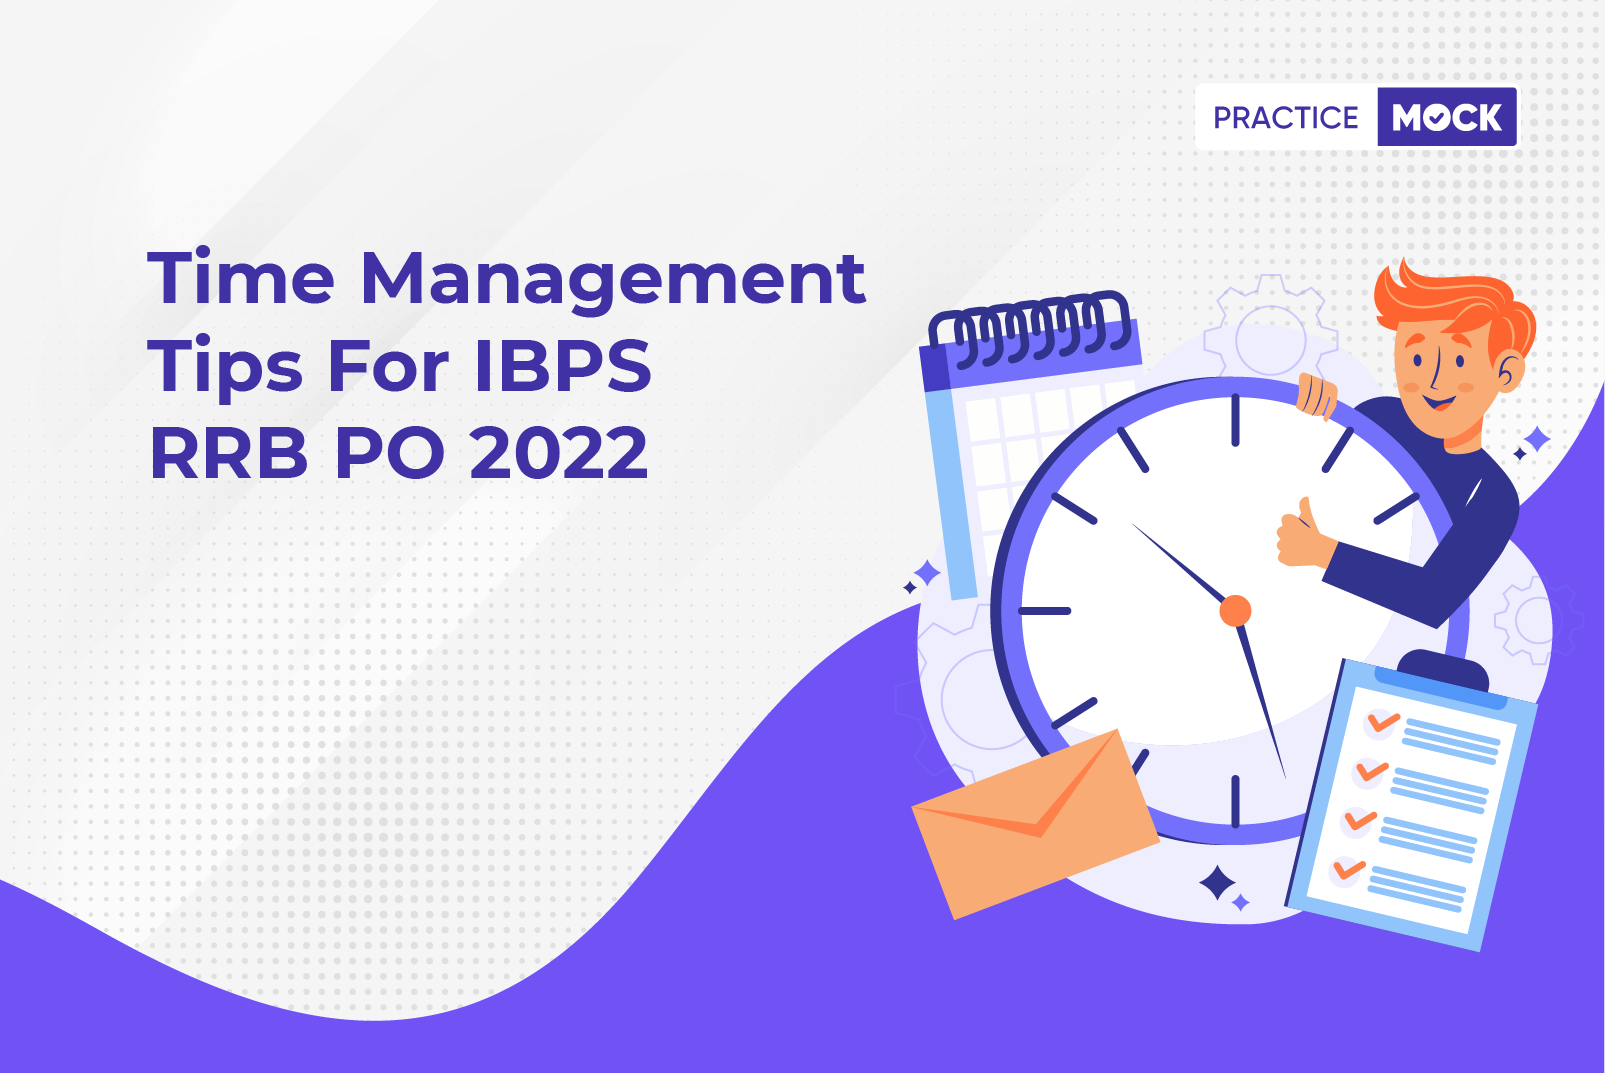 Time Management for IBPS RRB PO